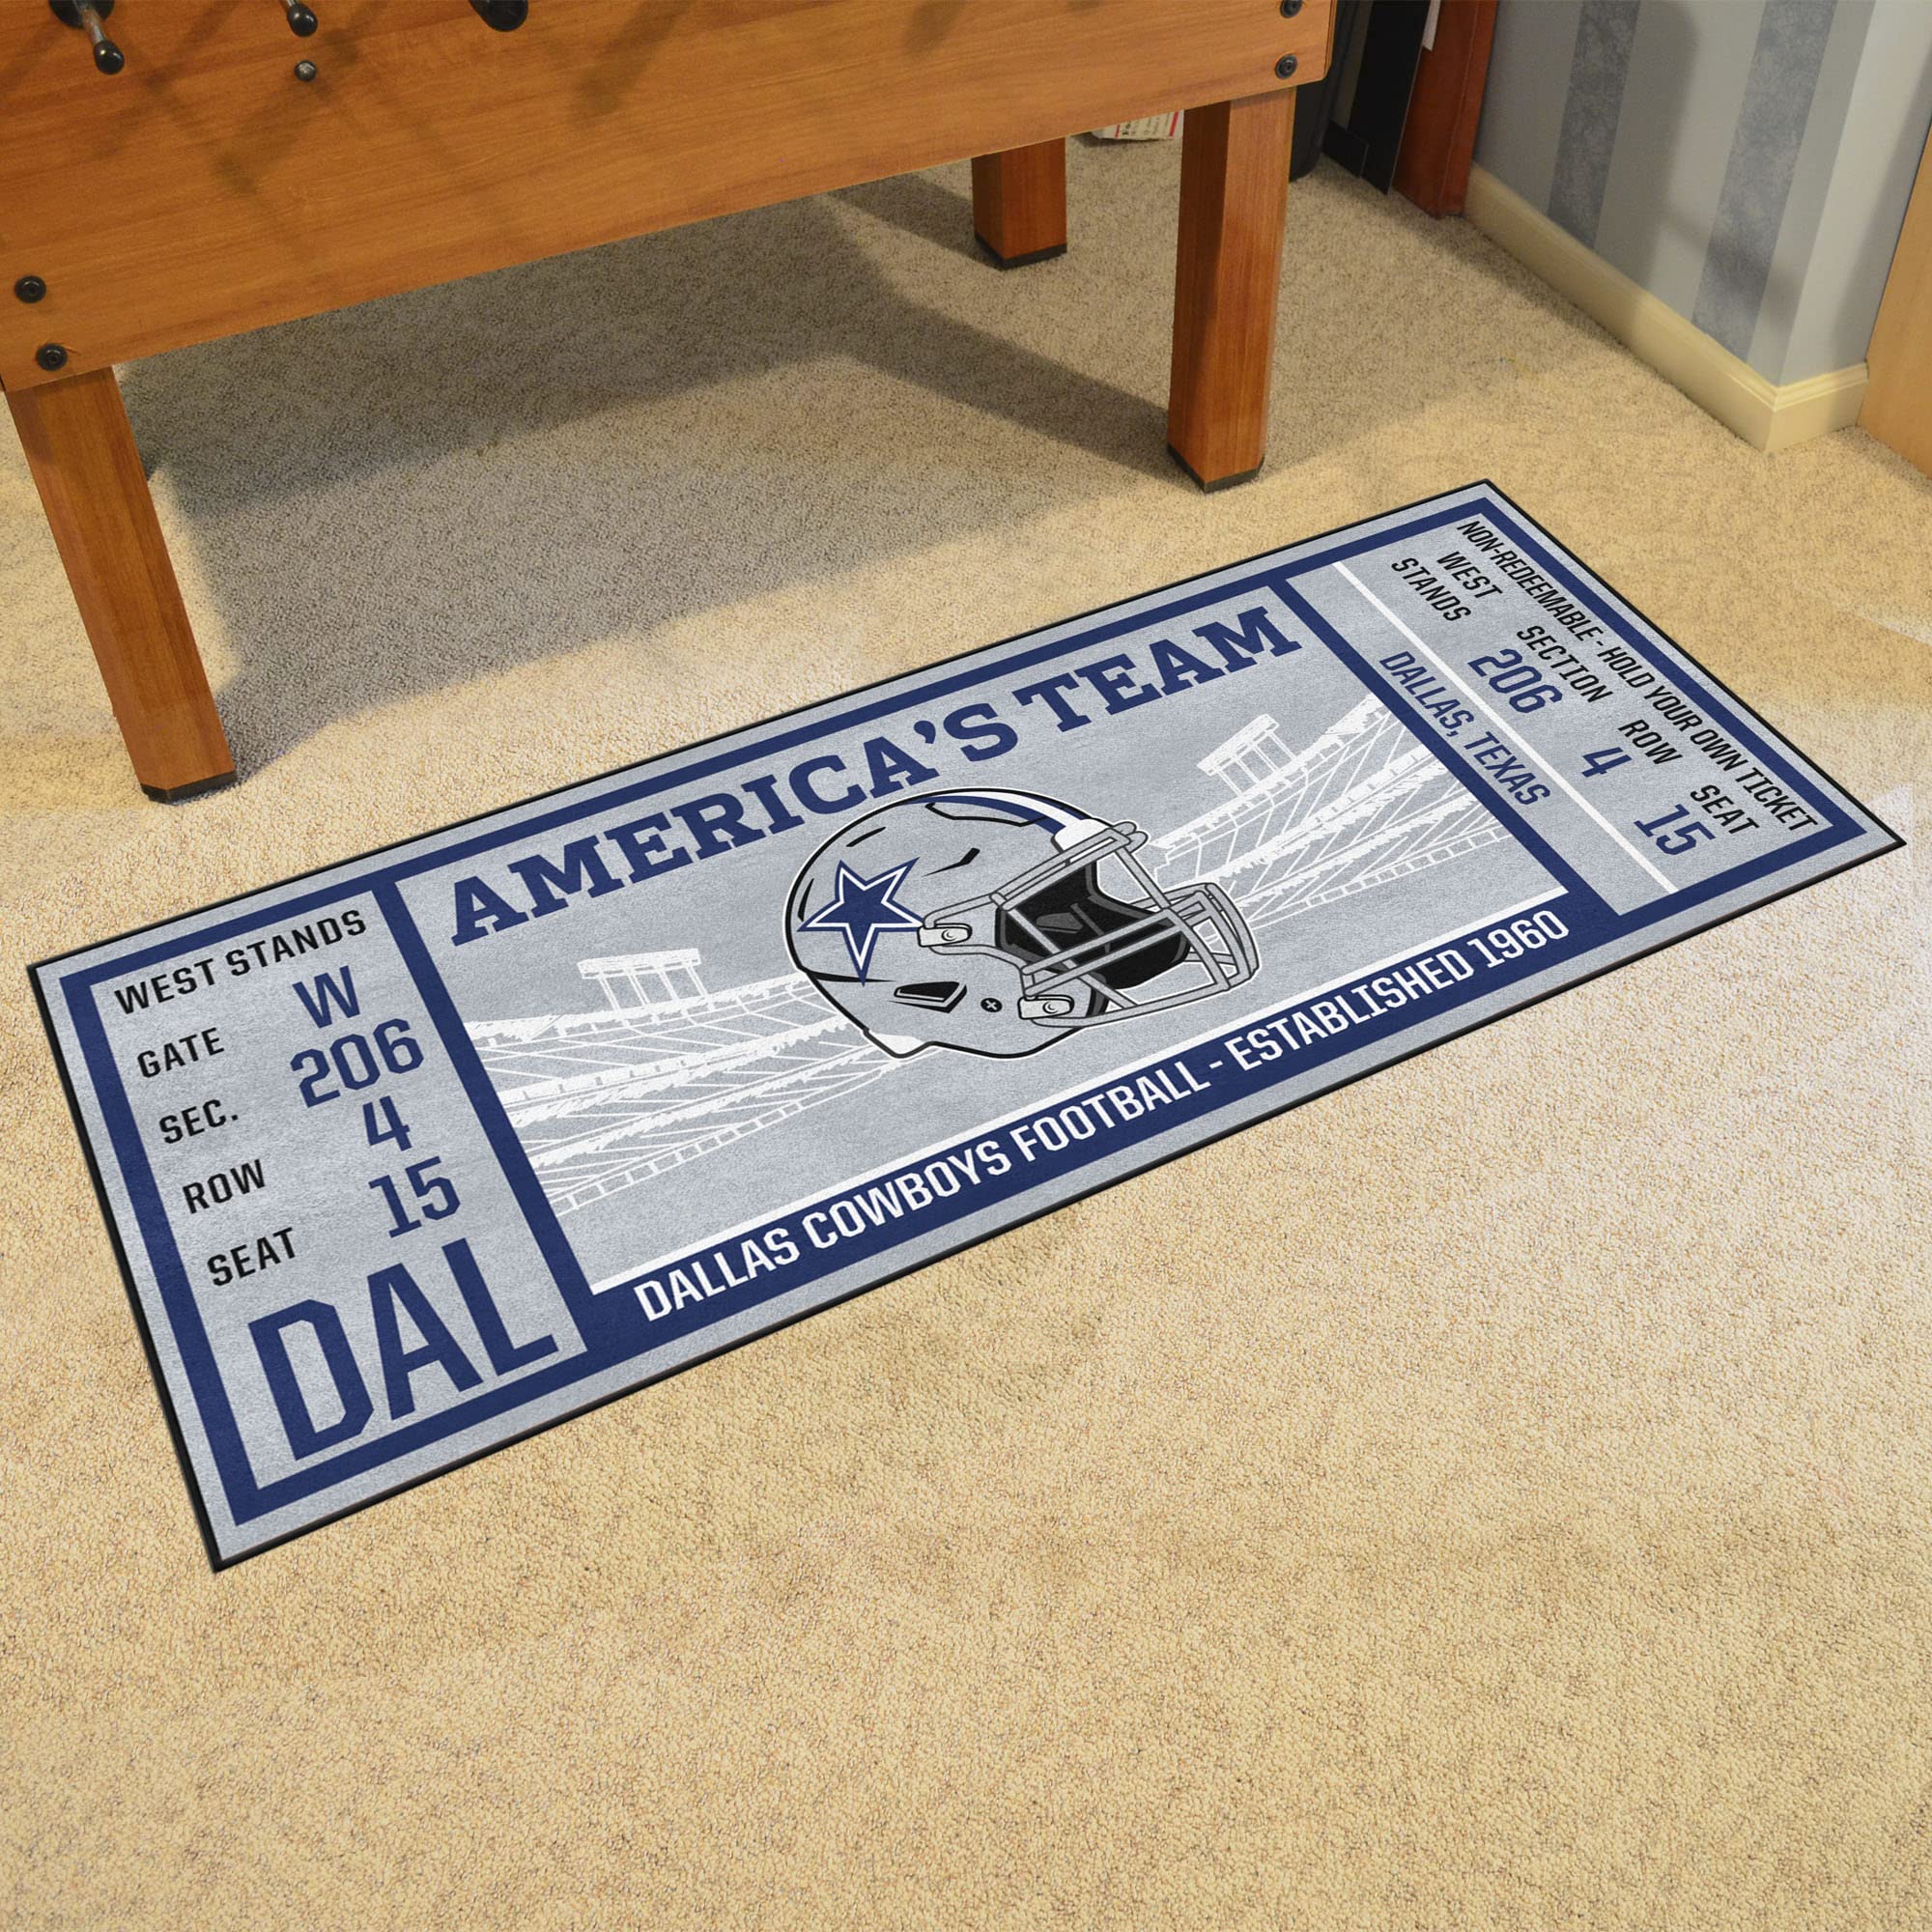 FANMATS 23118 Dallas Cowboys Ticket Design Runner Rug - 30in. x 72in. | Sports Fan Area Rug, Home Decor Rug and Tailgating Mat